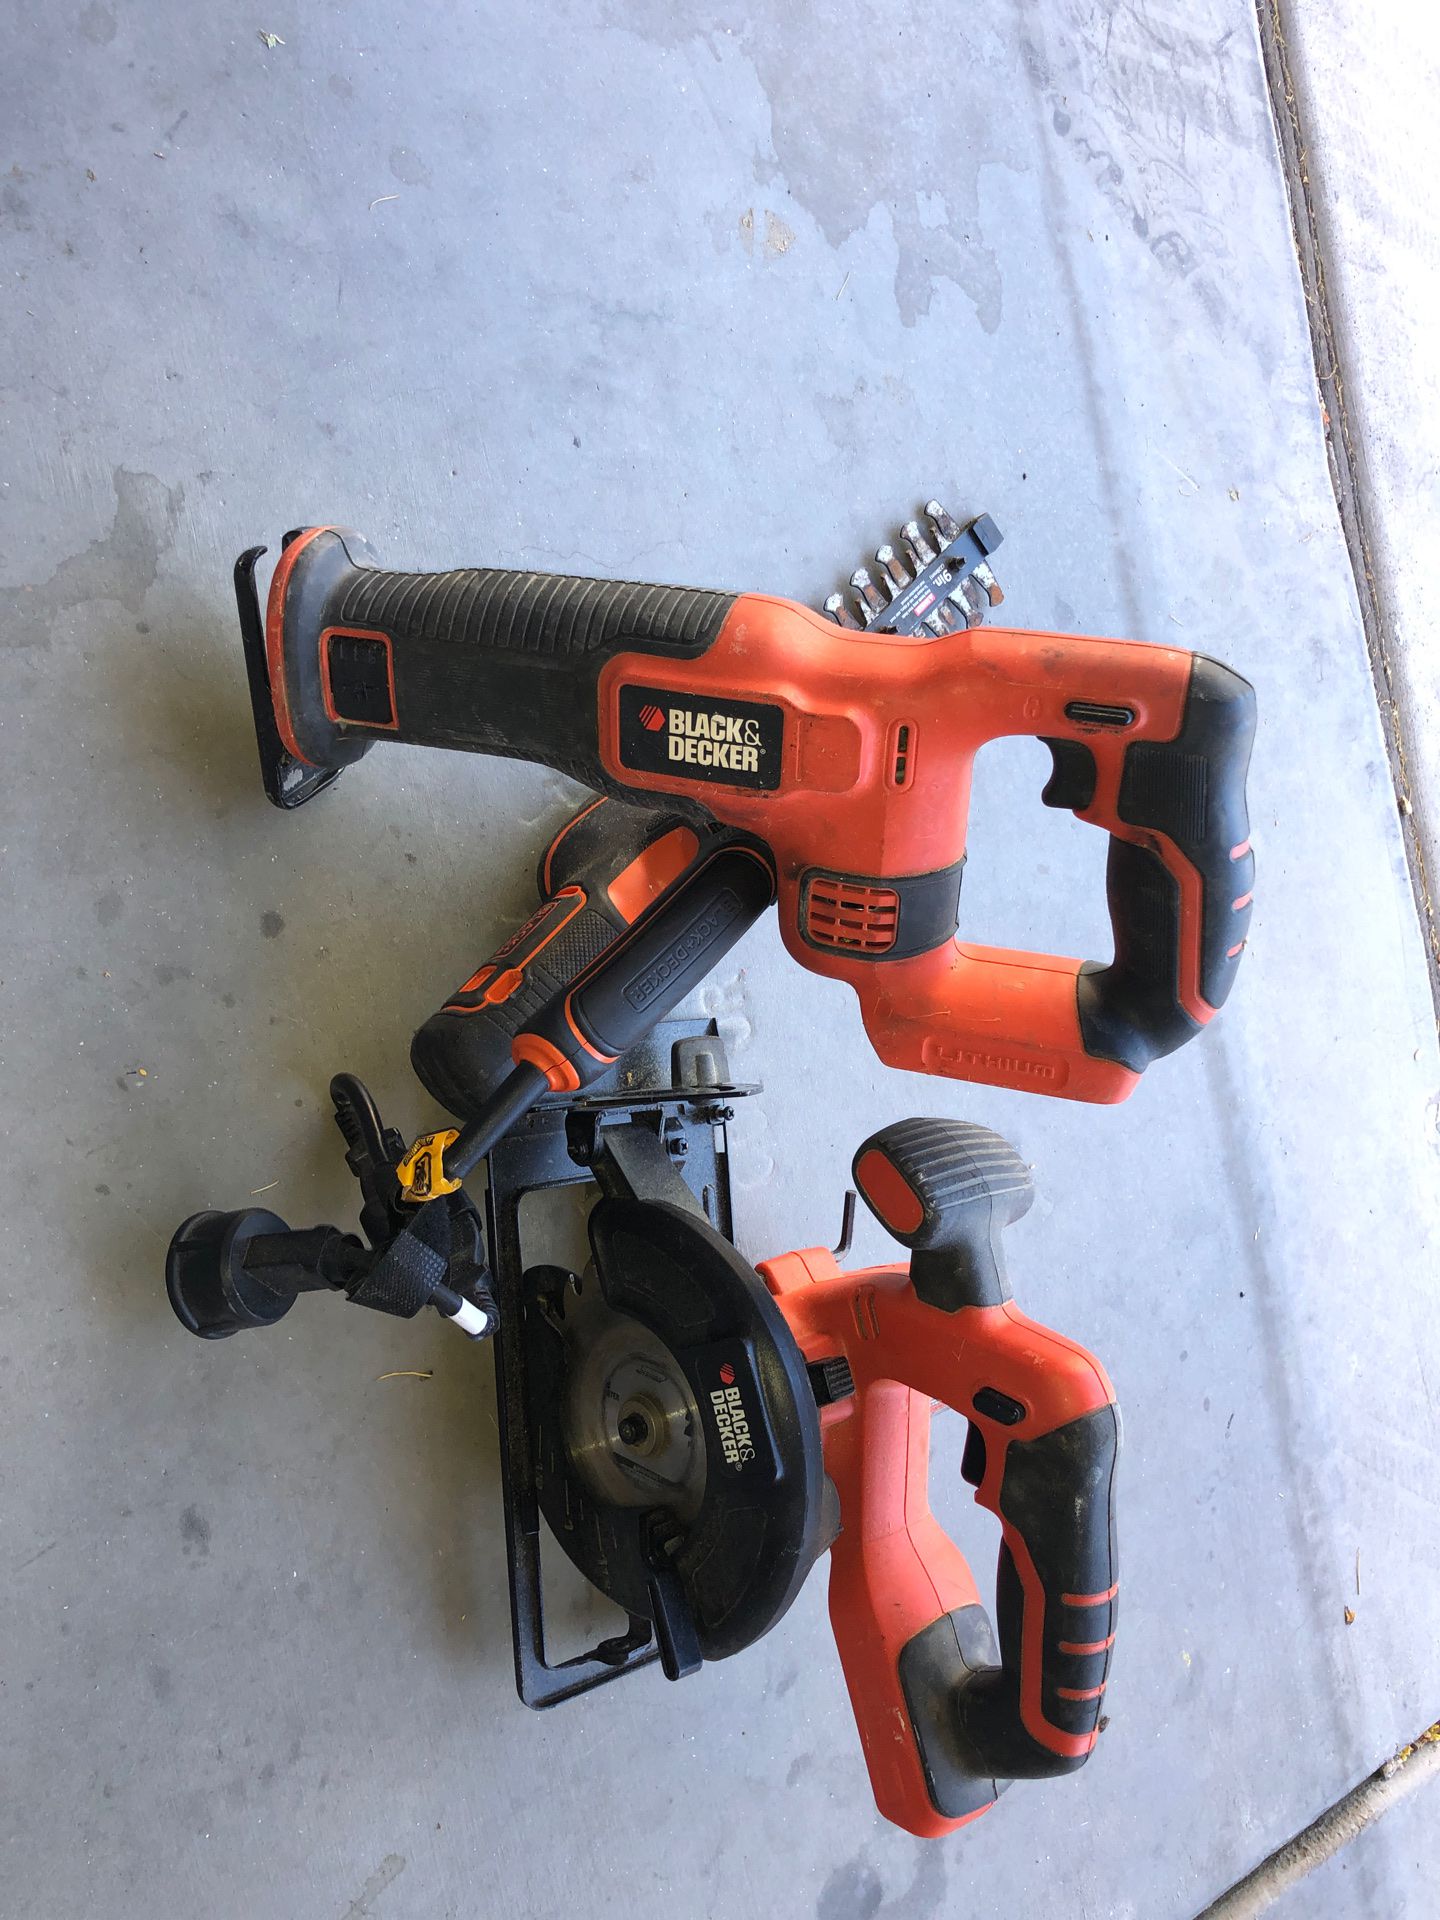 Black and decker power tools